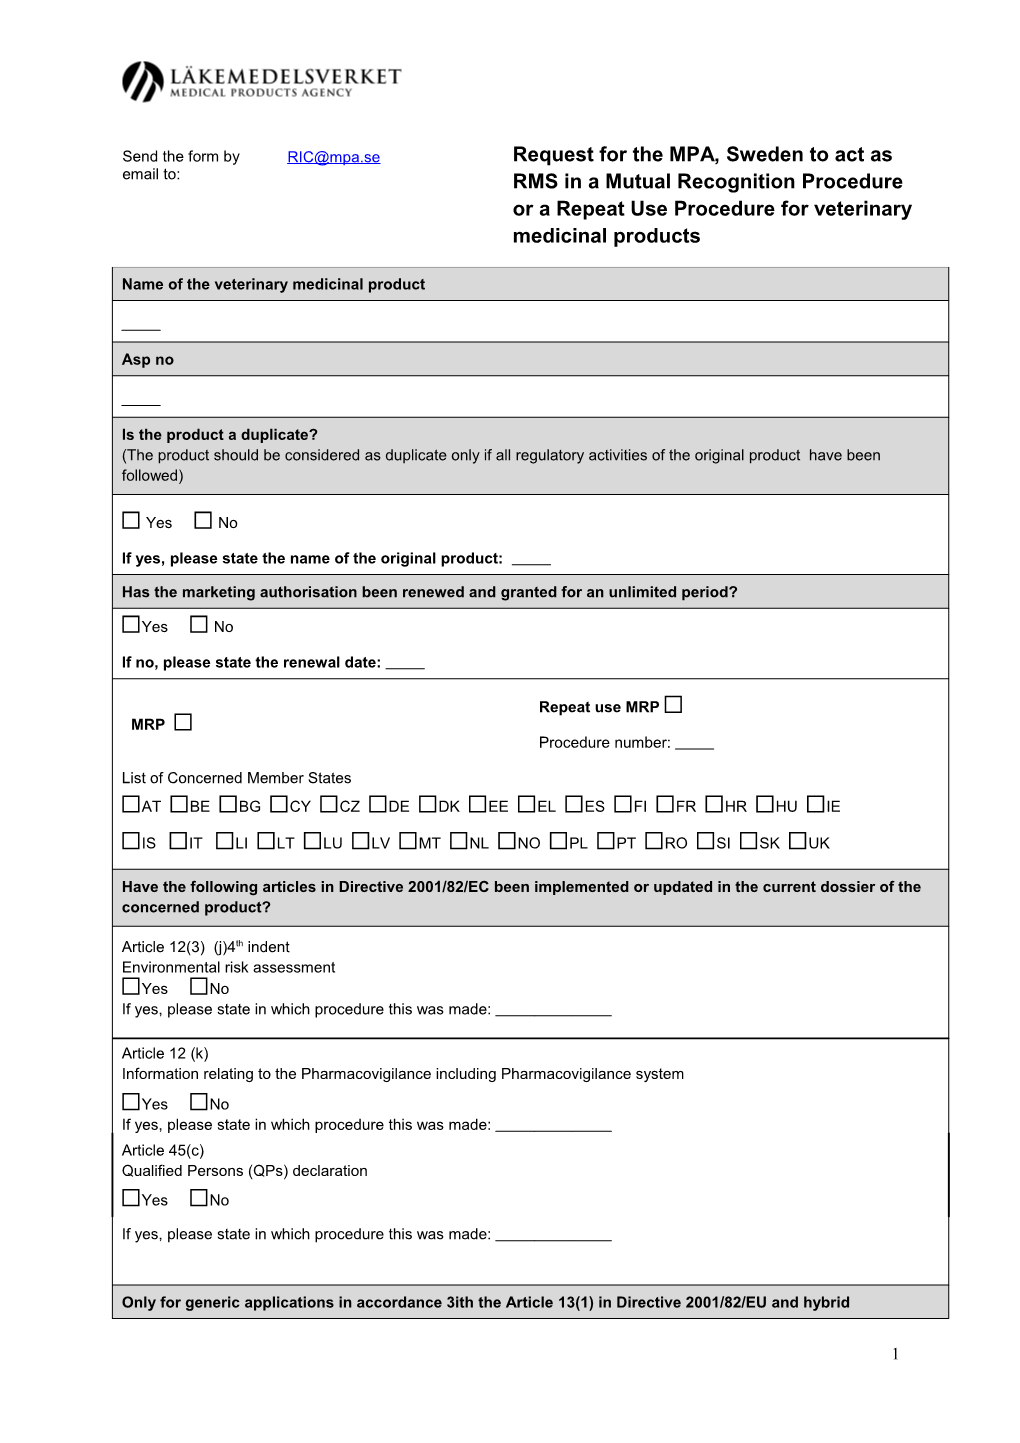 Proposed Application Form to Be Submitted to the CMS